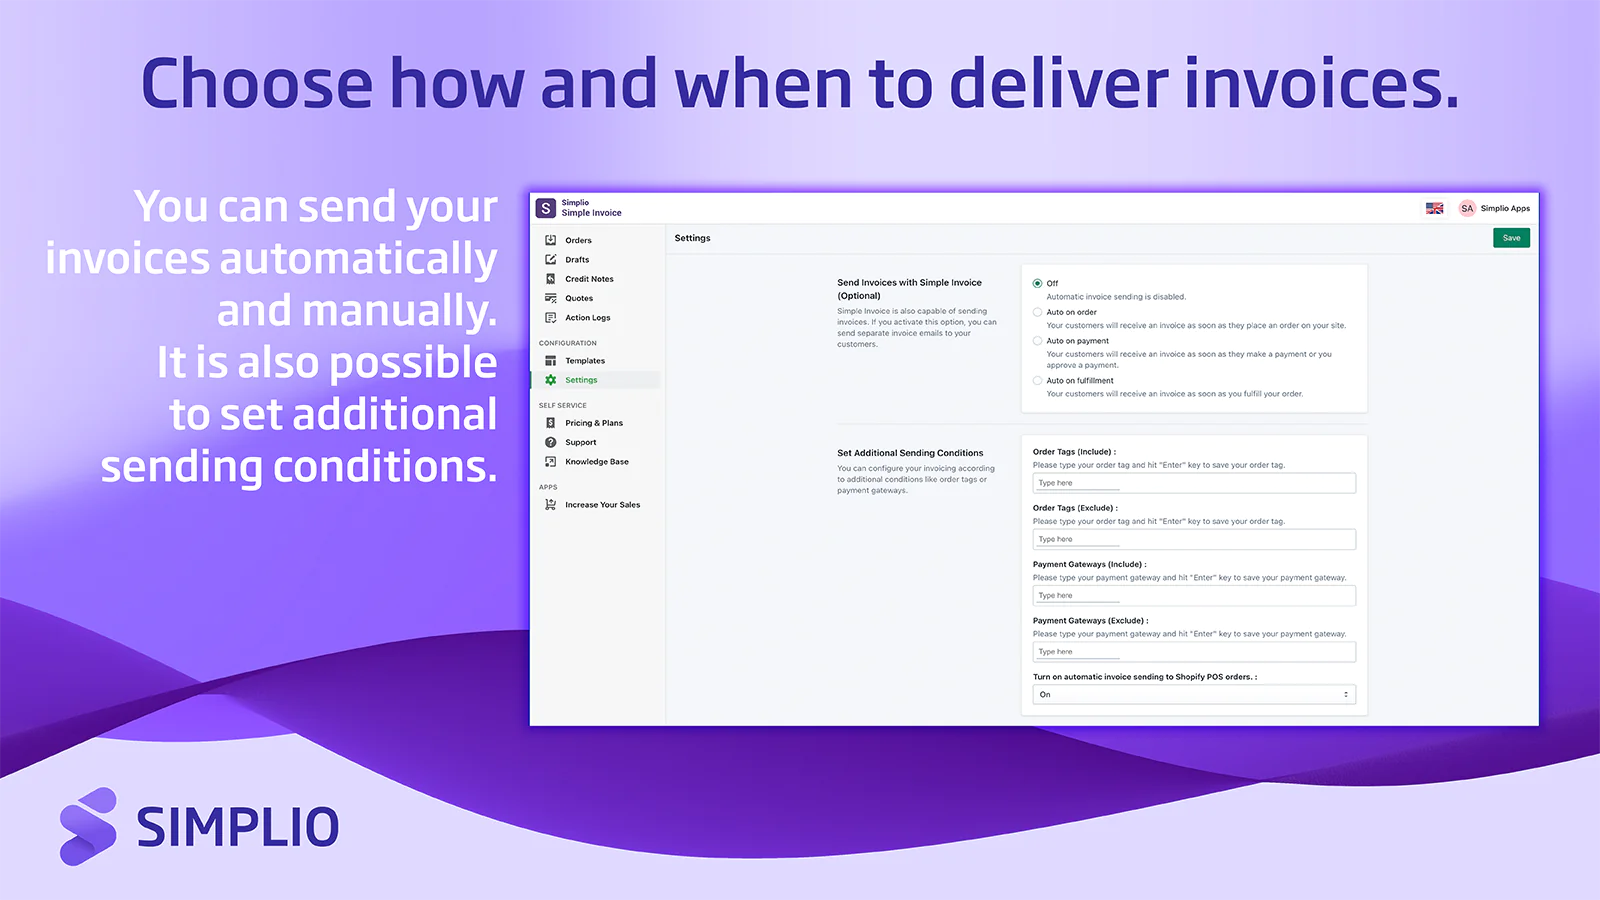 Choose how and when to deliver invoices.